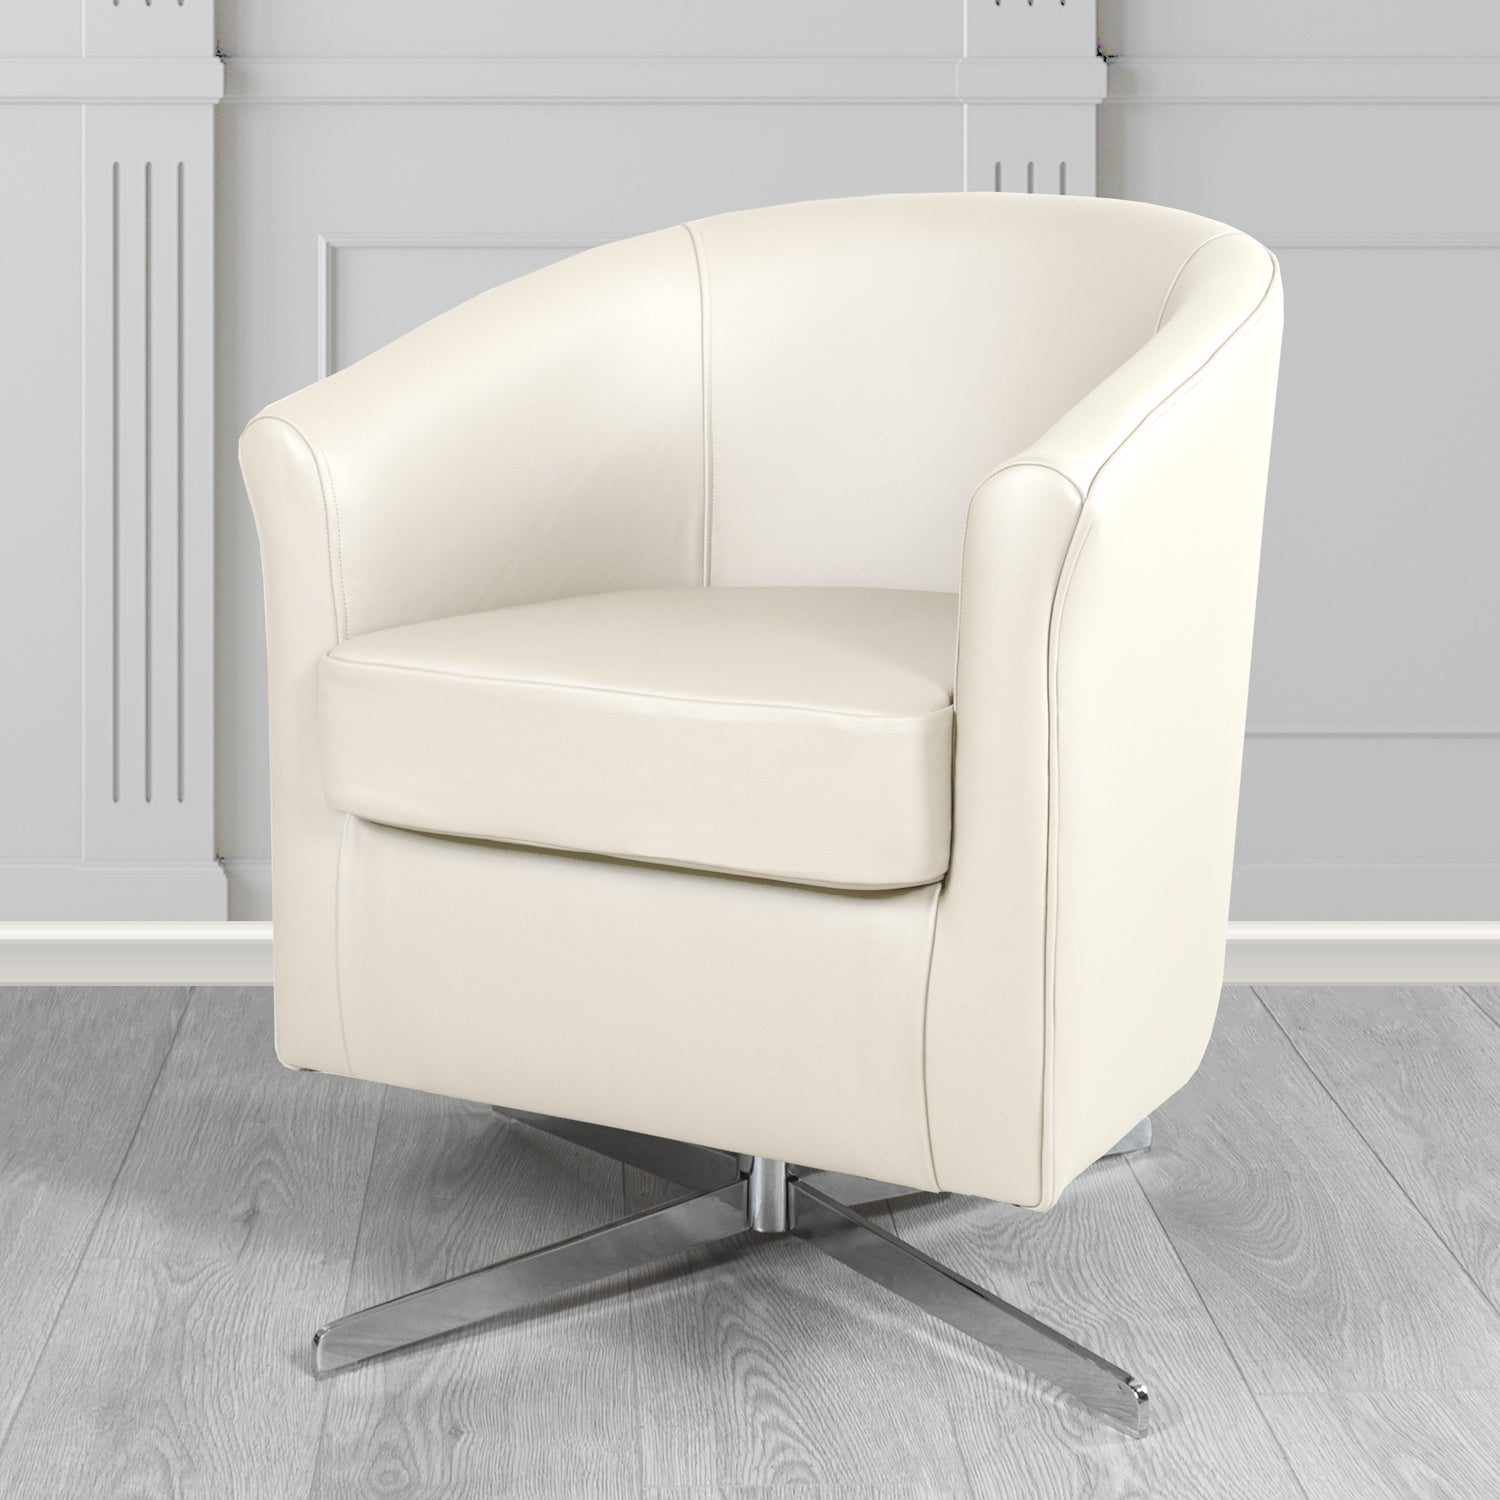 Cannes Swivel Tub Chair in Shelly White Crib 5 Genuine Leather - The Tub Chair Shop